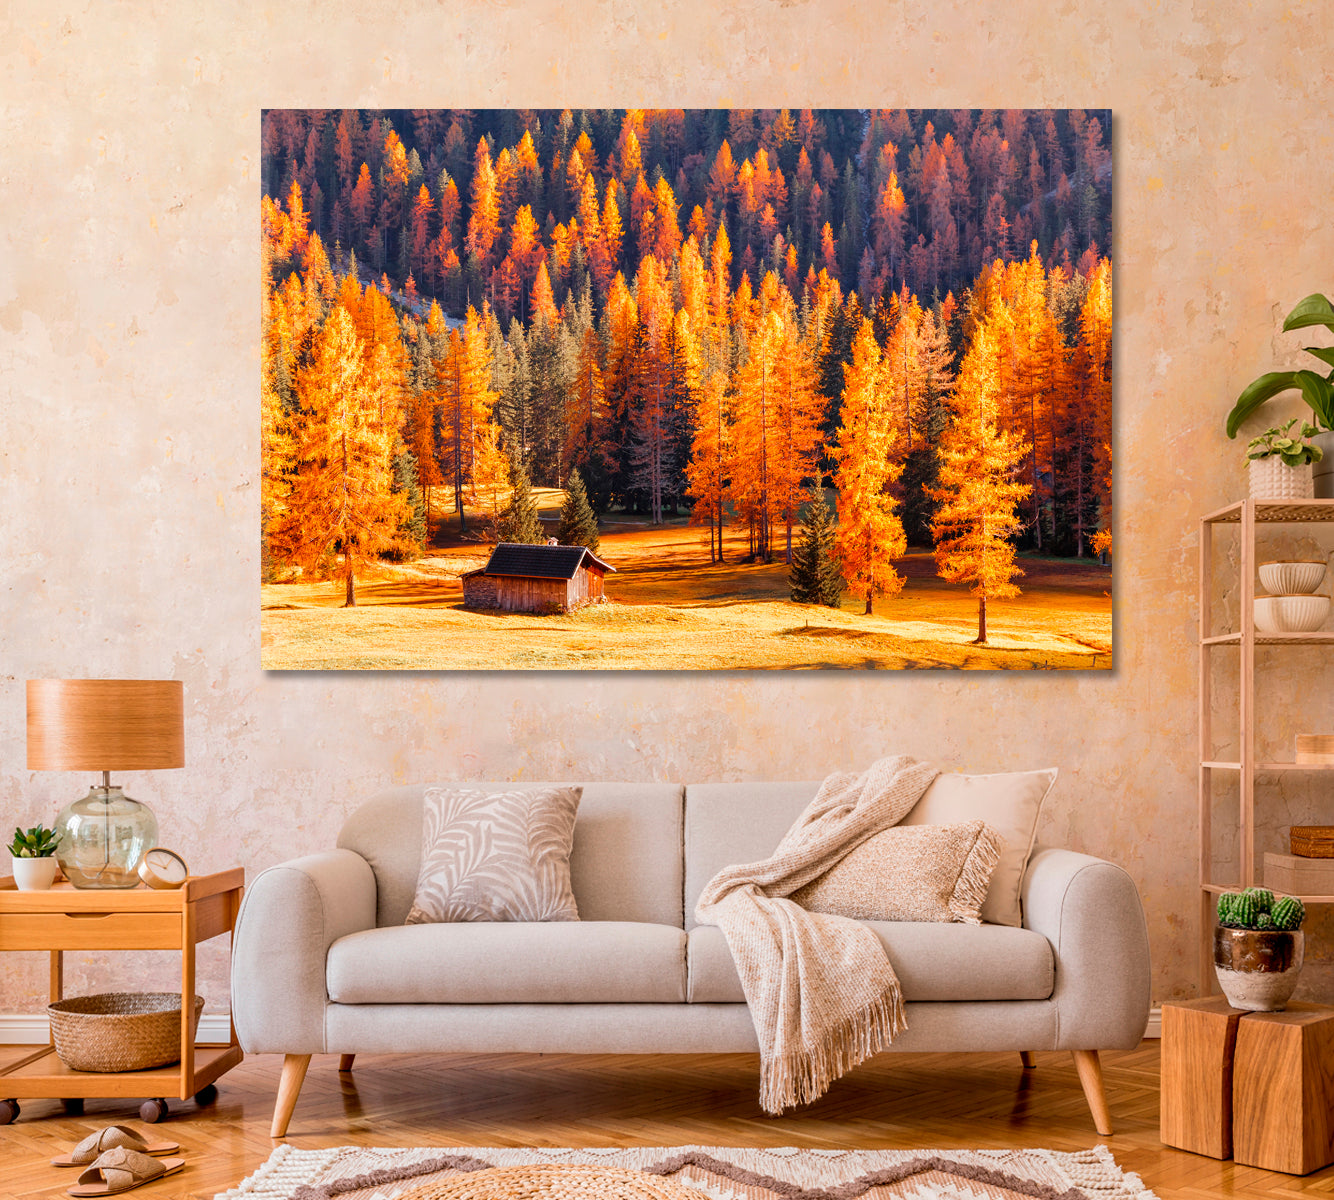 Wooden House Surrounded by Autumn Dolomites Trees Canvas Print-Canvas Print-CetArt-1 Panel-24x16 inches-CetArt